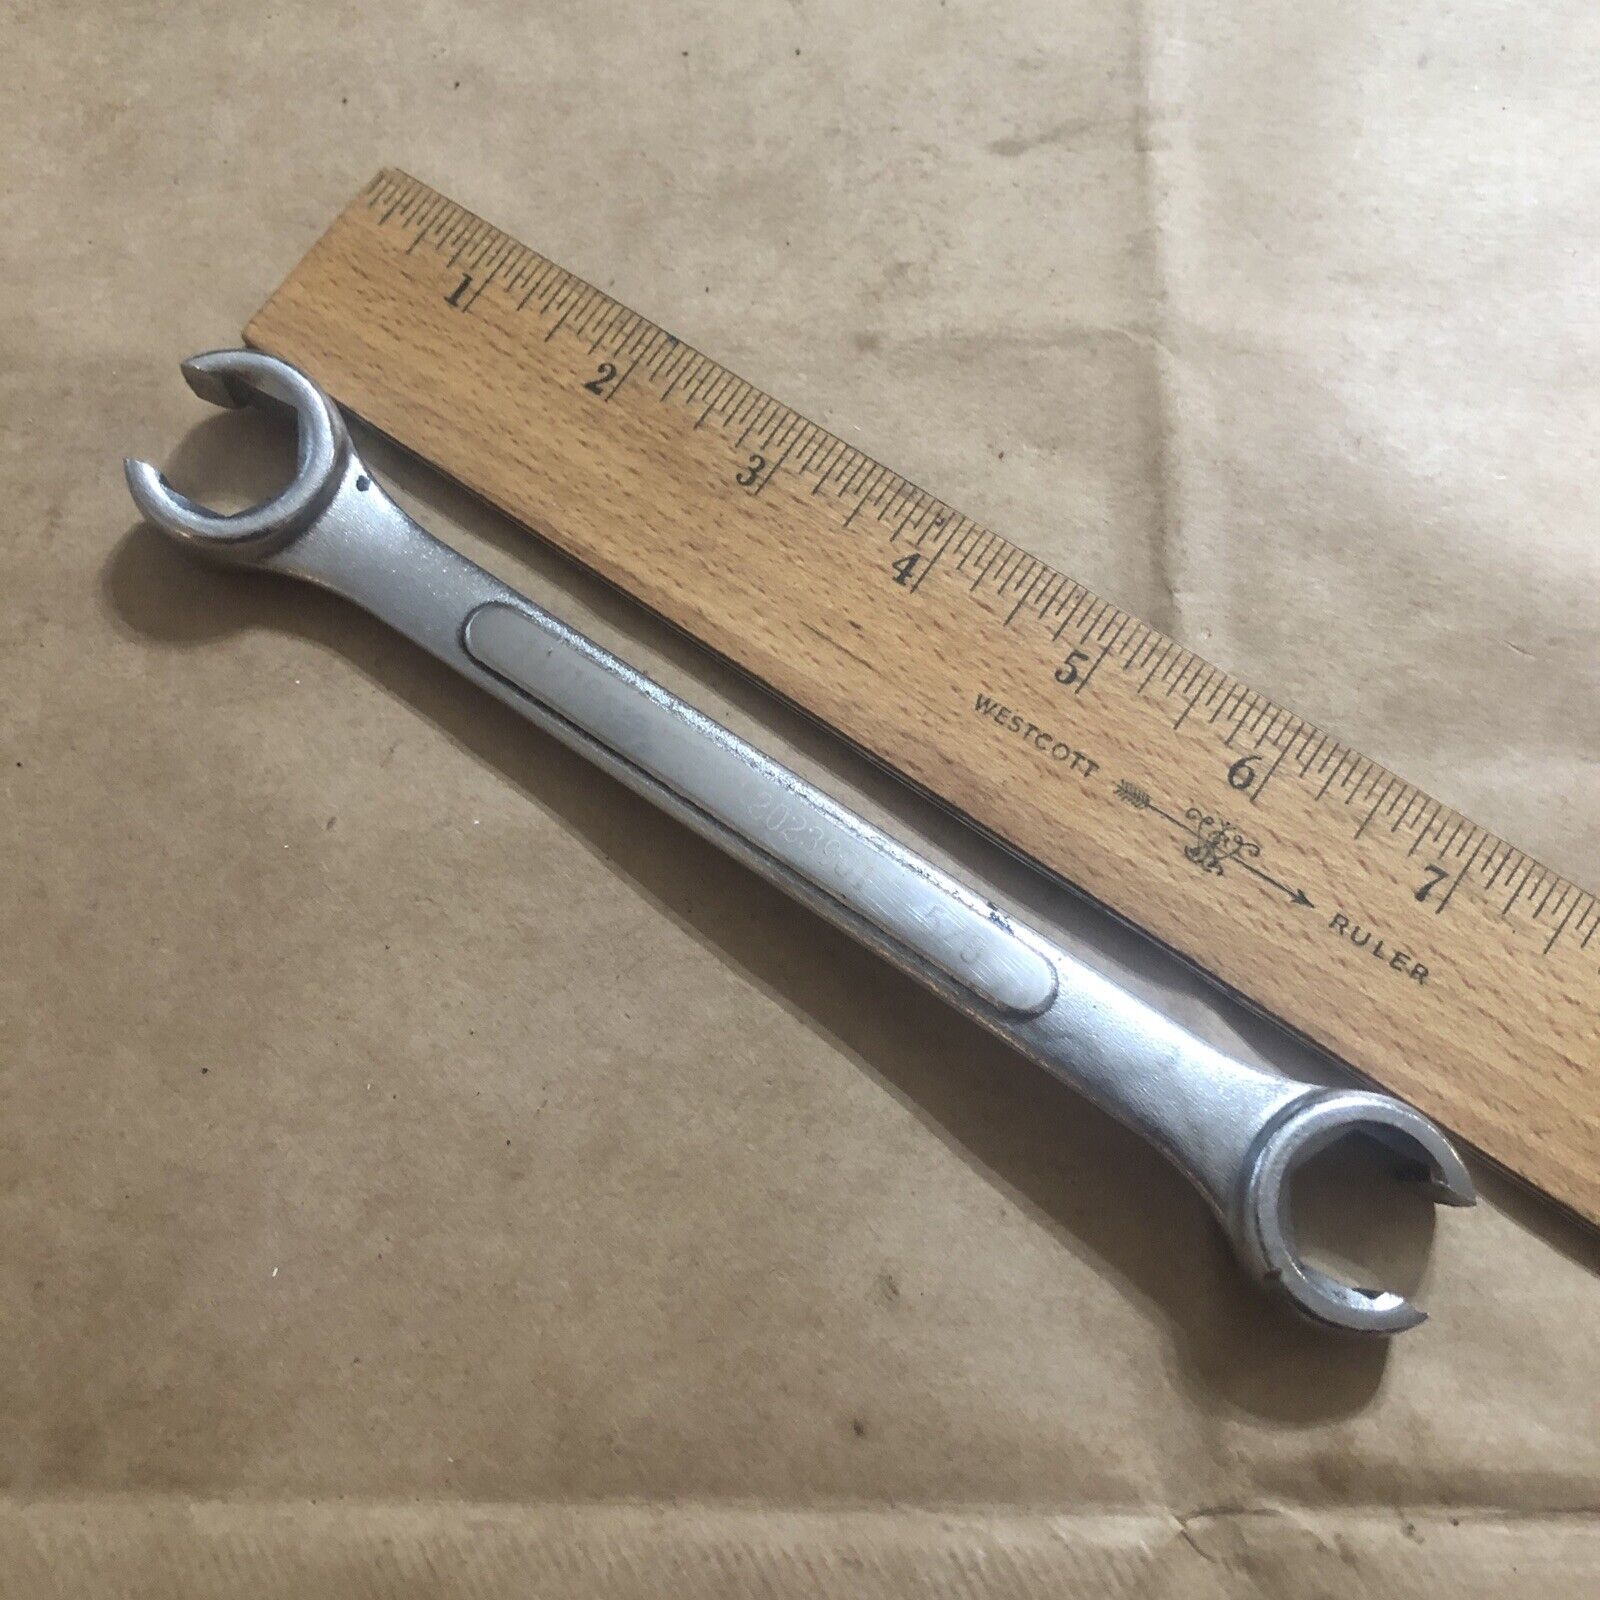 Ace Hardware Tools 5/8 X 11/16" Flare Nut / Line Wrench 7.5” Long Offset Look !